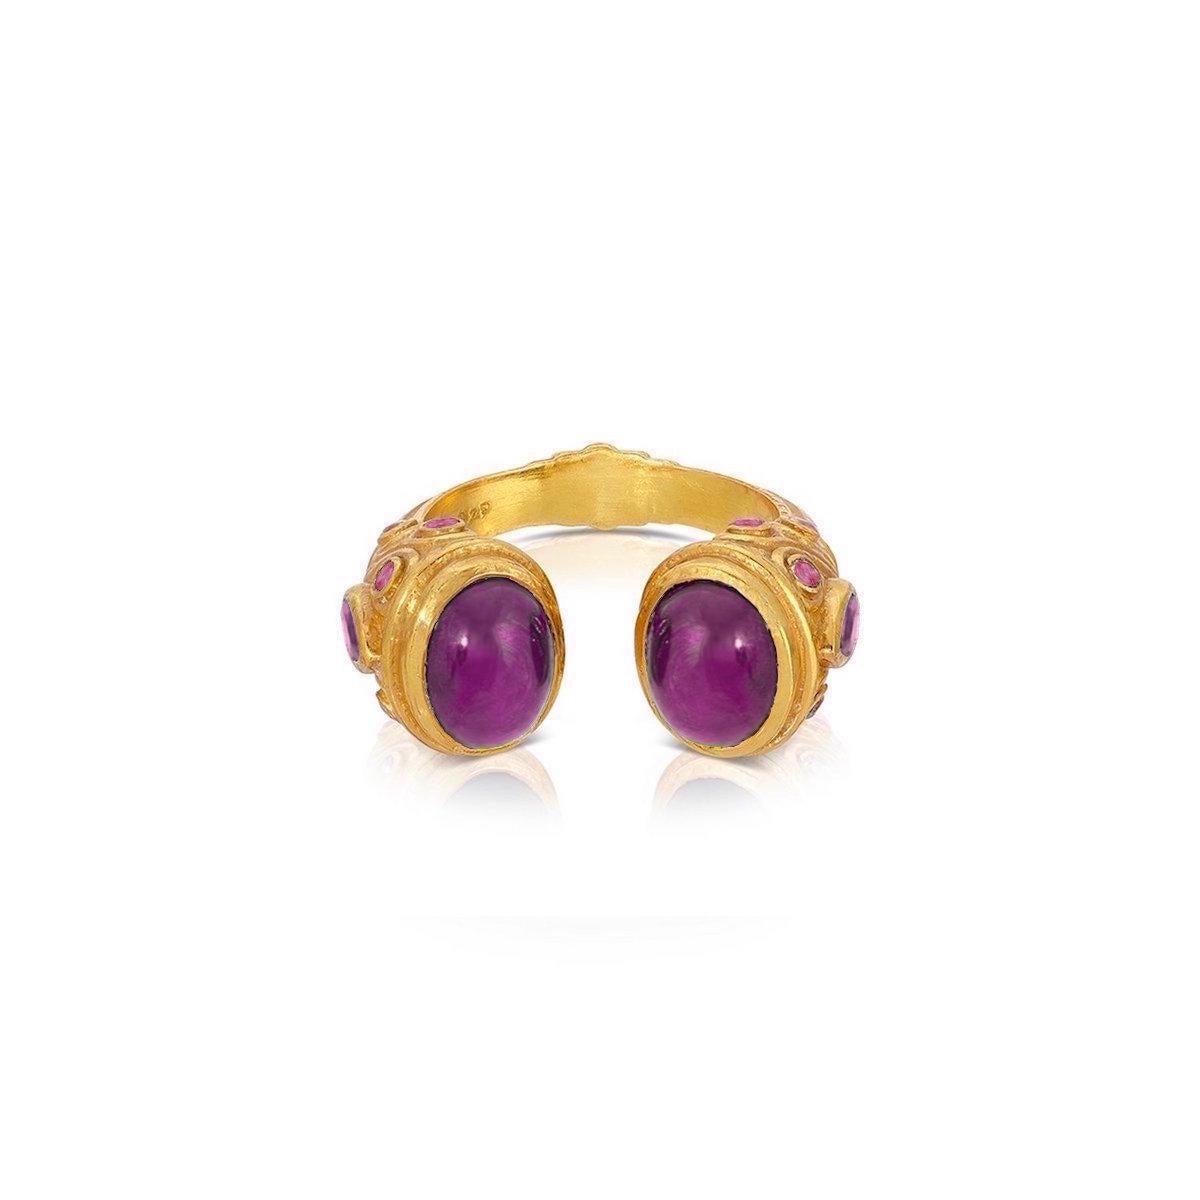 A contemporary interpretation of the opulent jewelry style of the Moguls... A fabulous Ruby ring featuring an open ended band tipped with fiery Rubies and pear shaped Rubies on the side of the ring. This beautiful ring features 6.75 Carats of Rubies